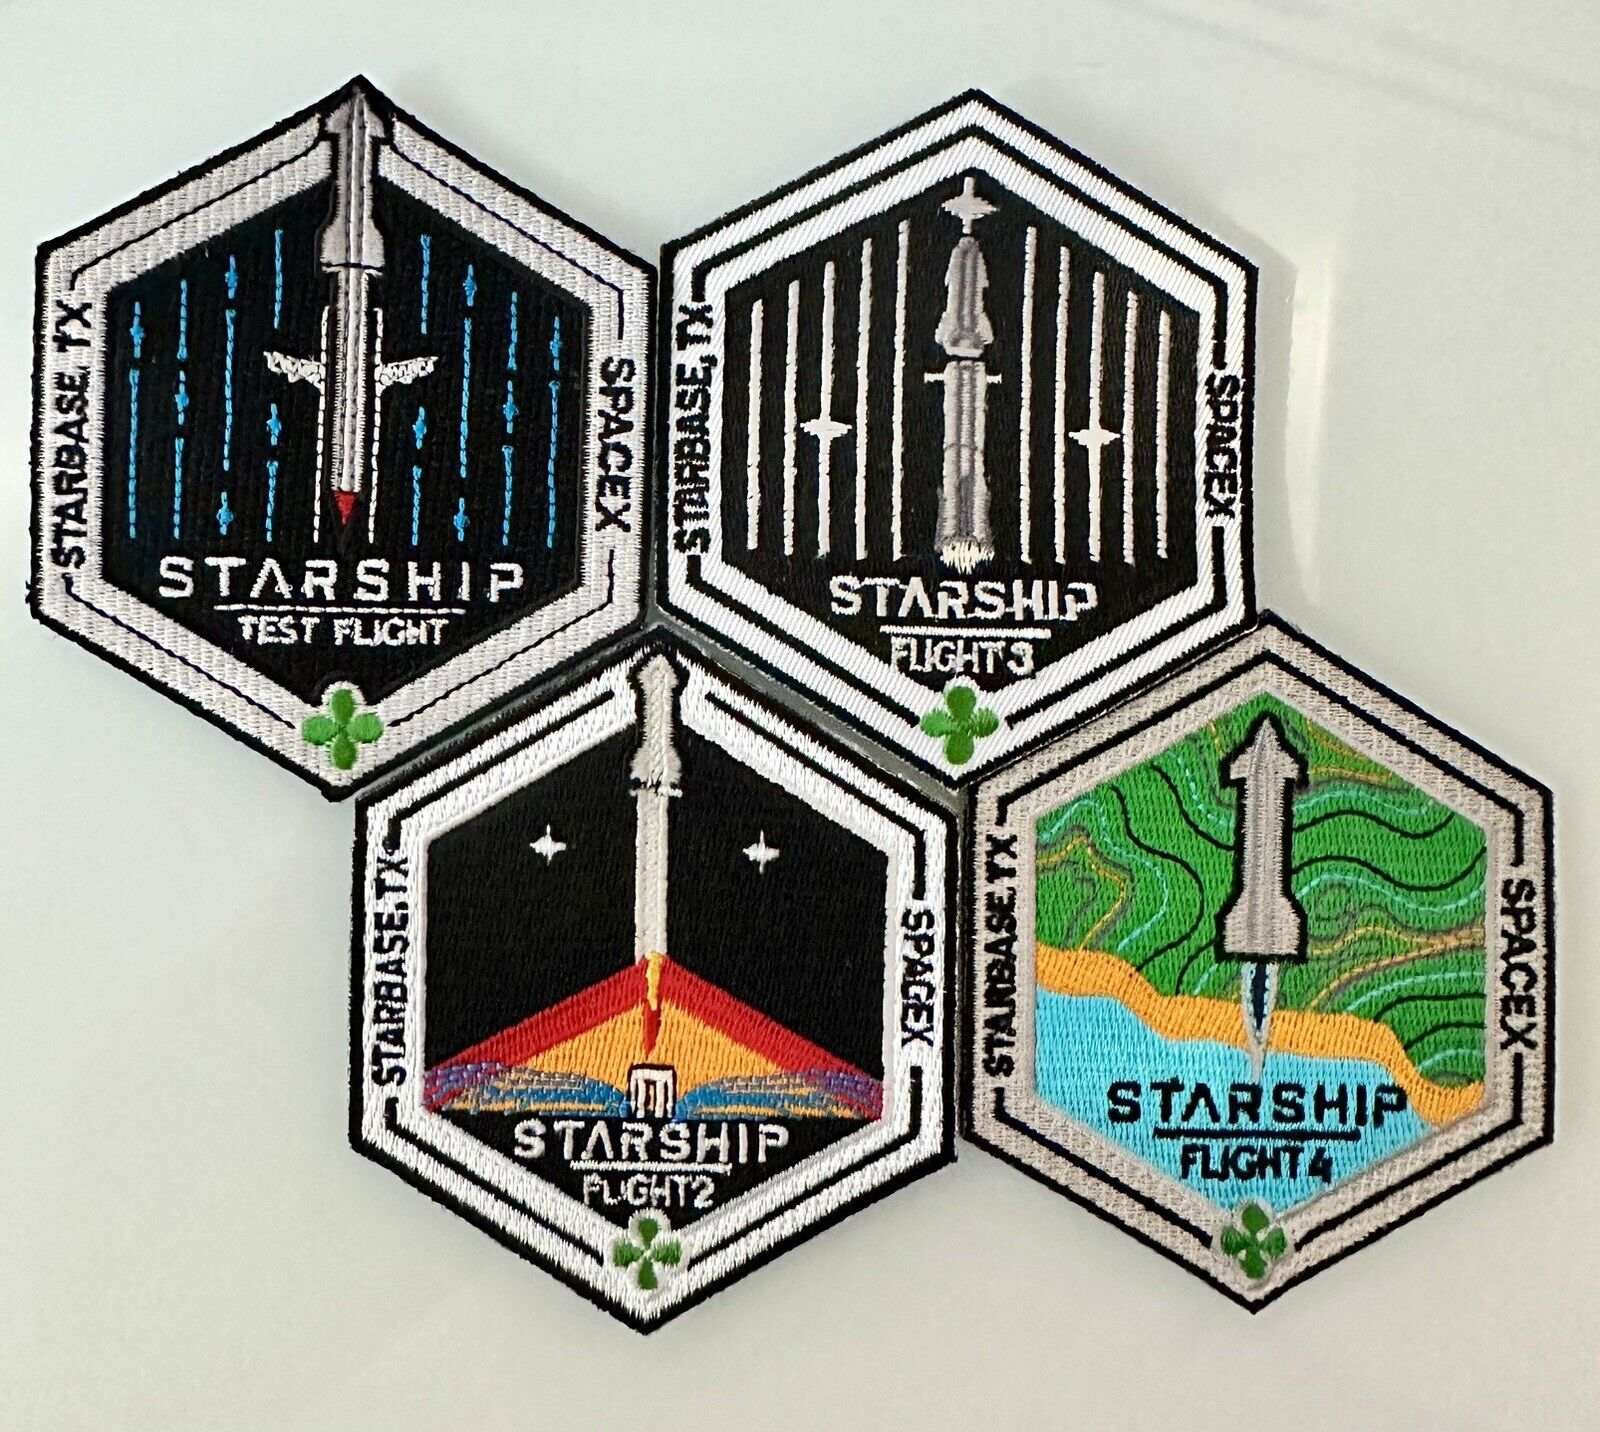 SpaceX Starship Missions 1 ,2, 3,4  Mission Patch Combo 4 Pack Patches 3”